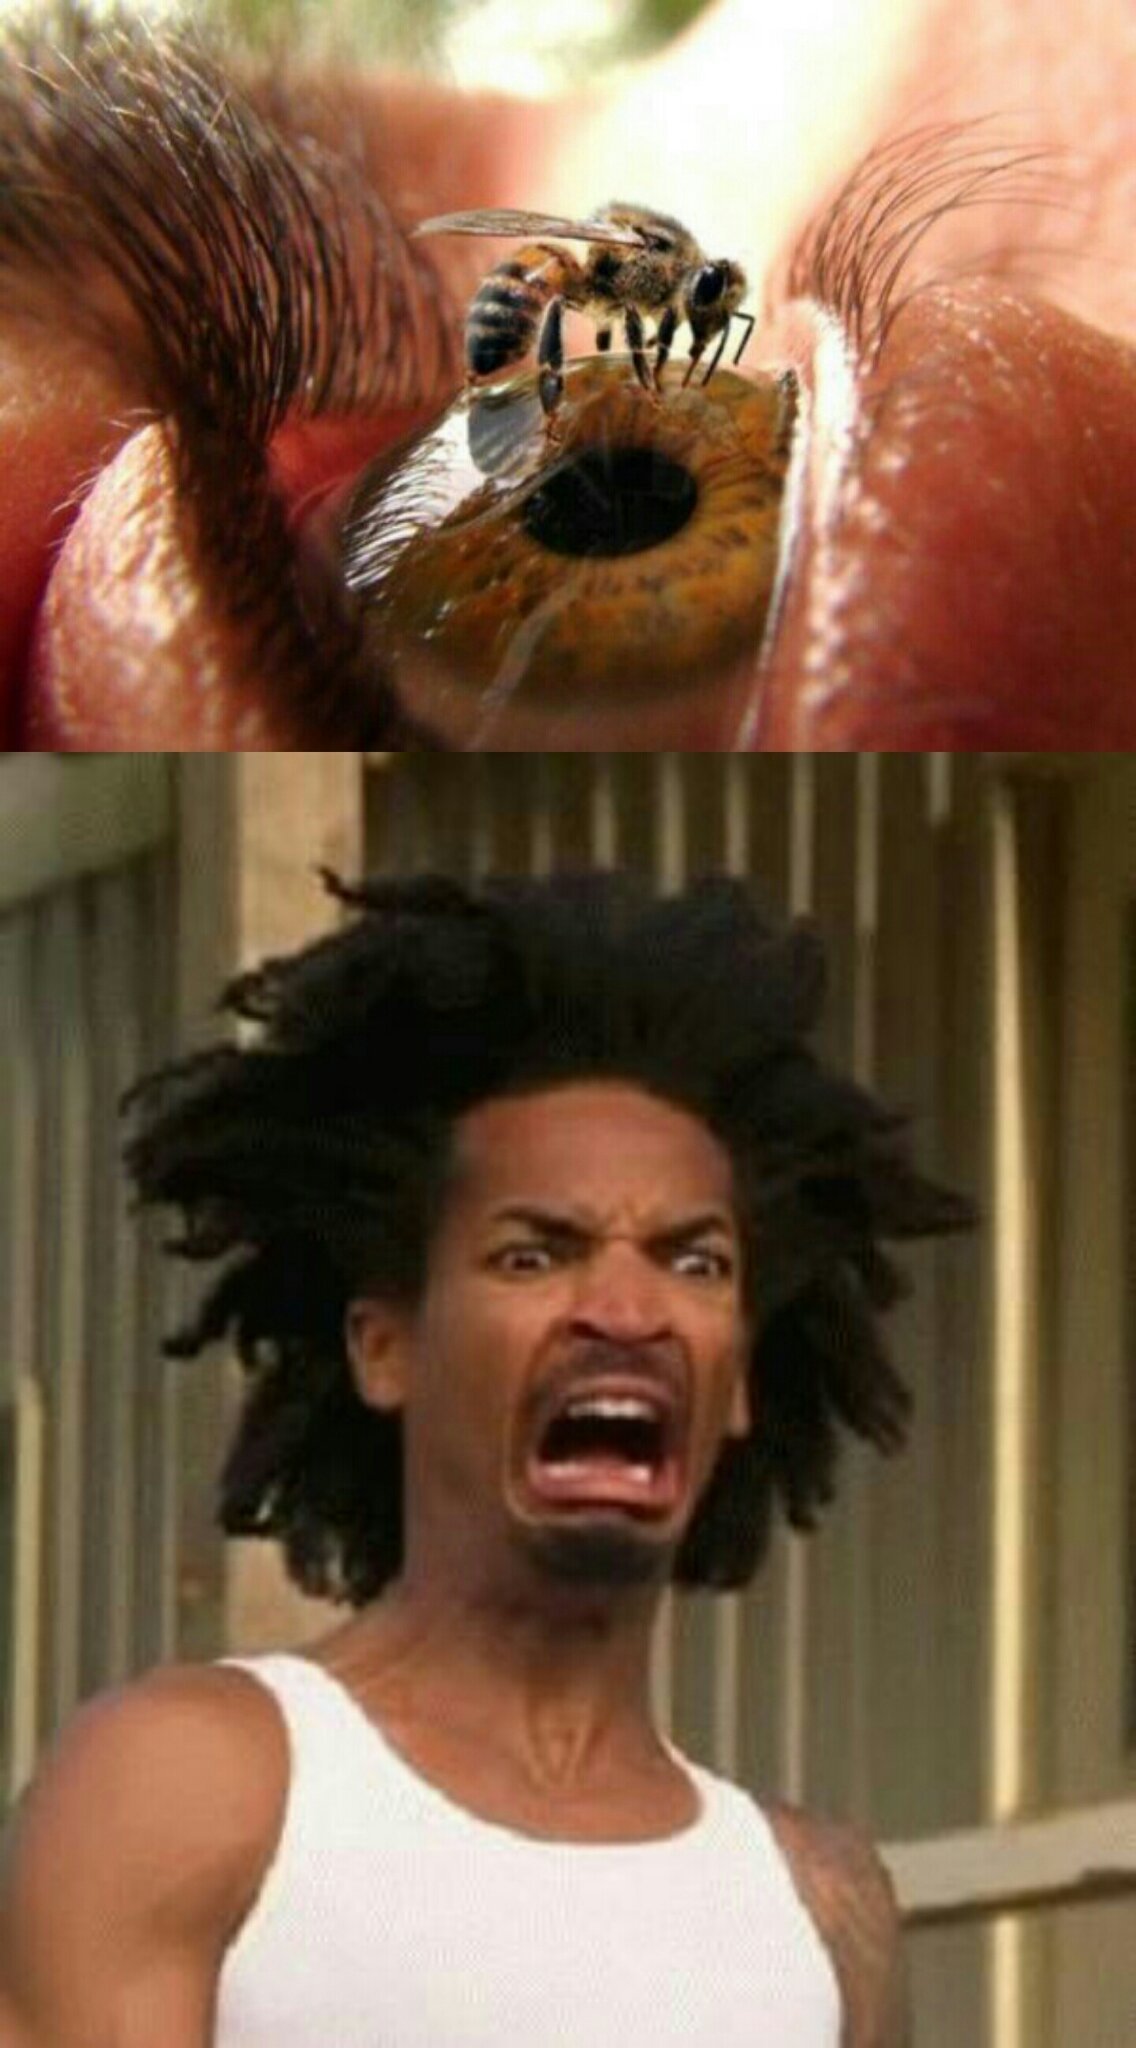 How much $$ to let a bee sting your eye? - meme